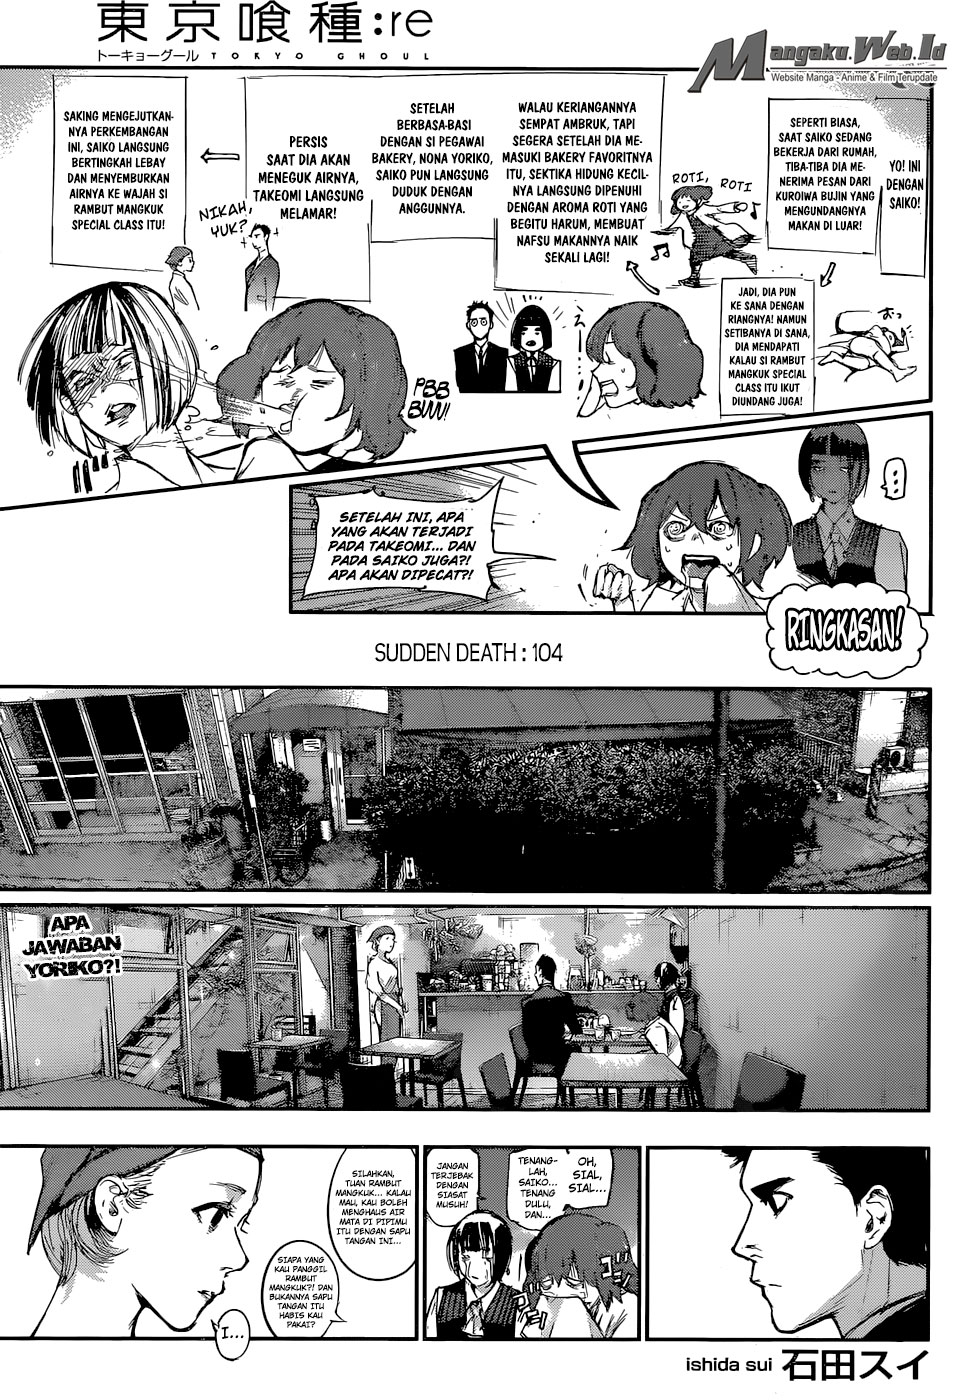 Tokyo Ghoul: re: Chapter 104 - Page 1